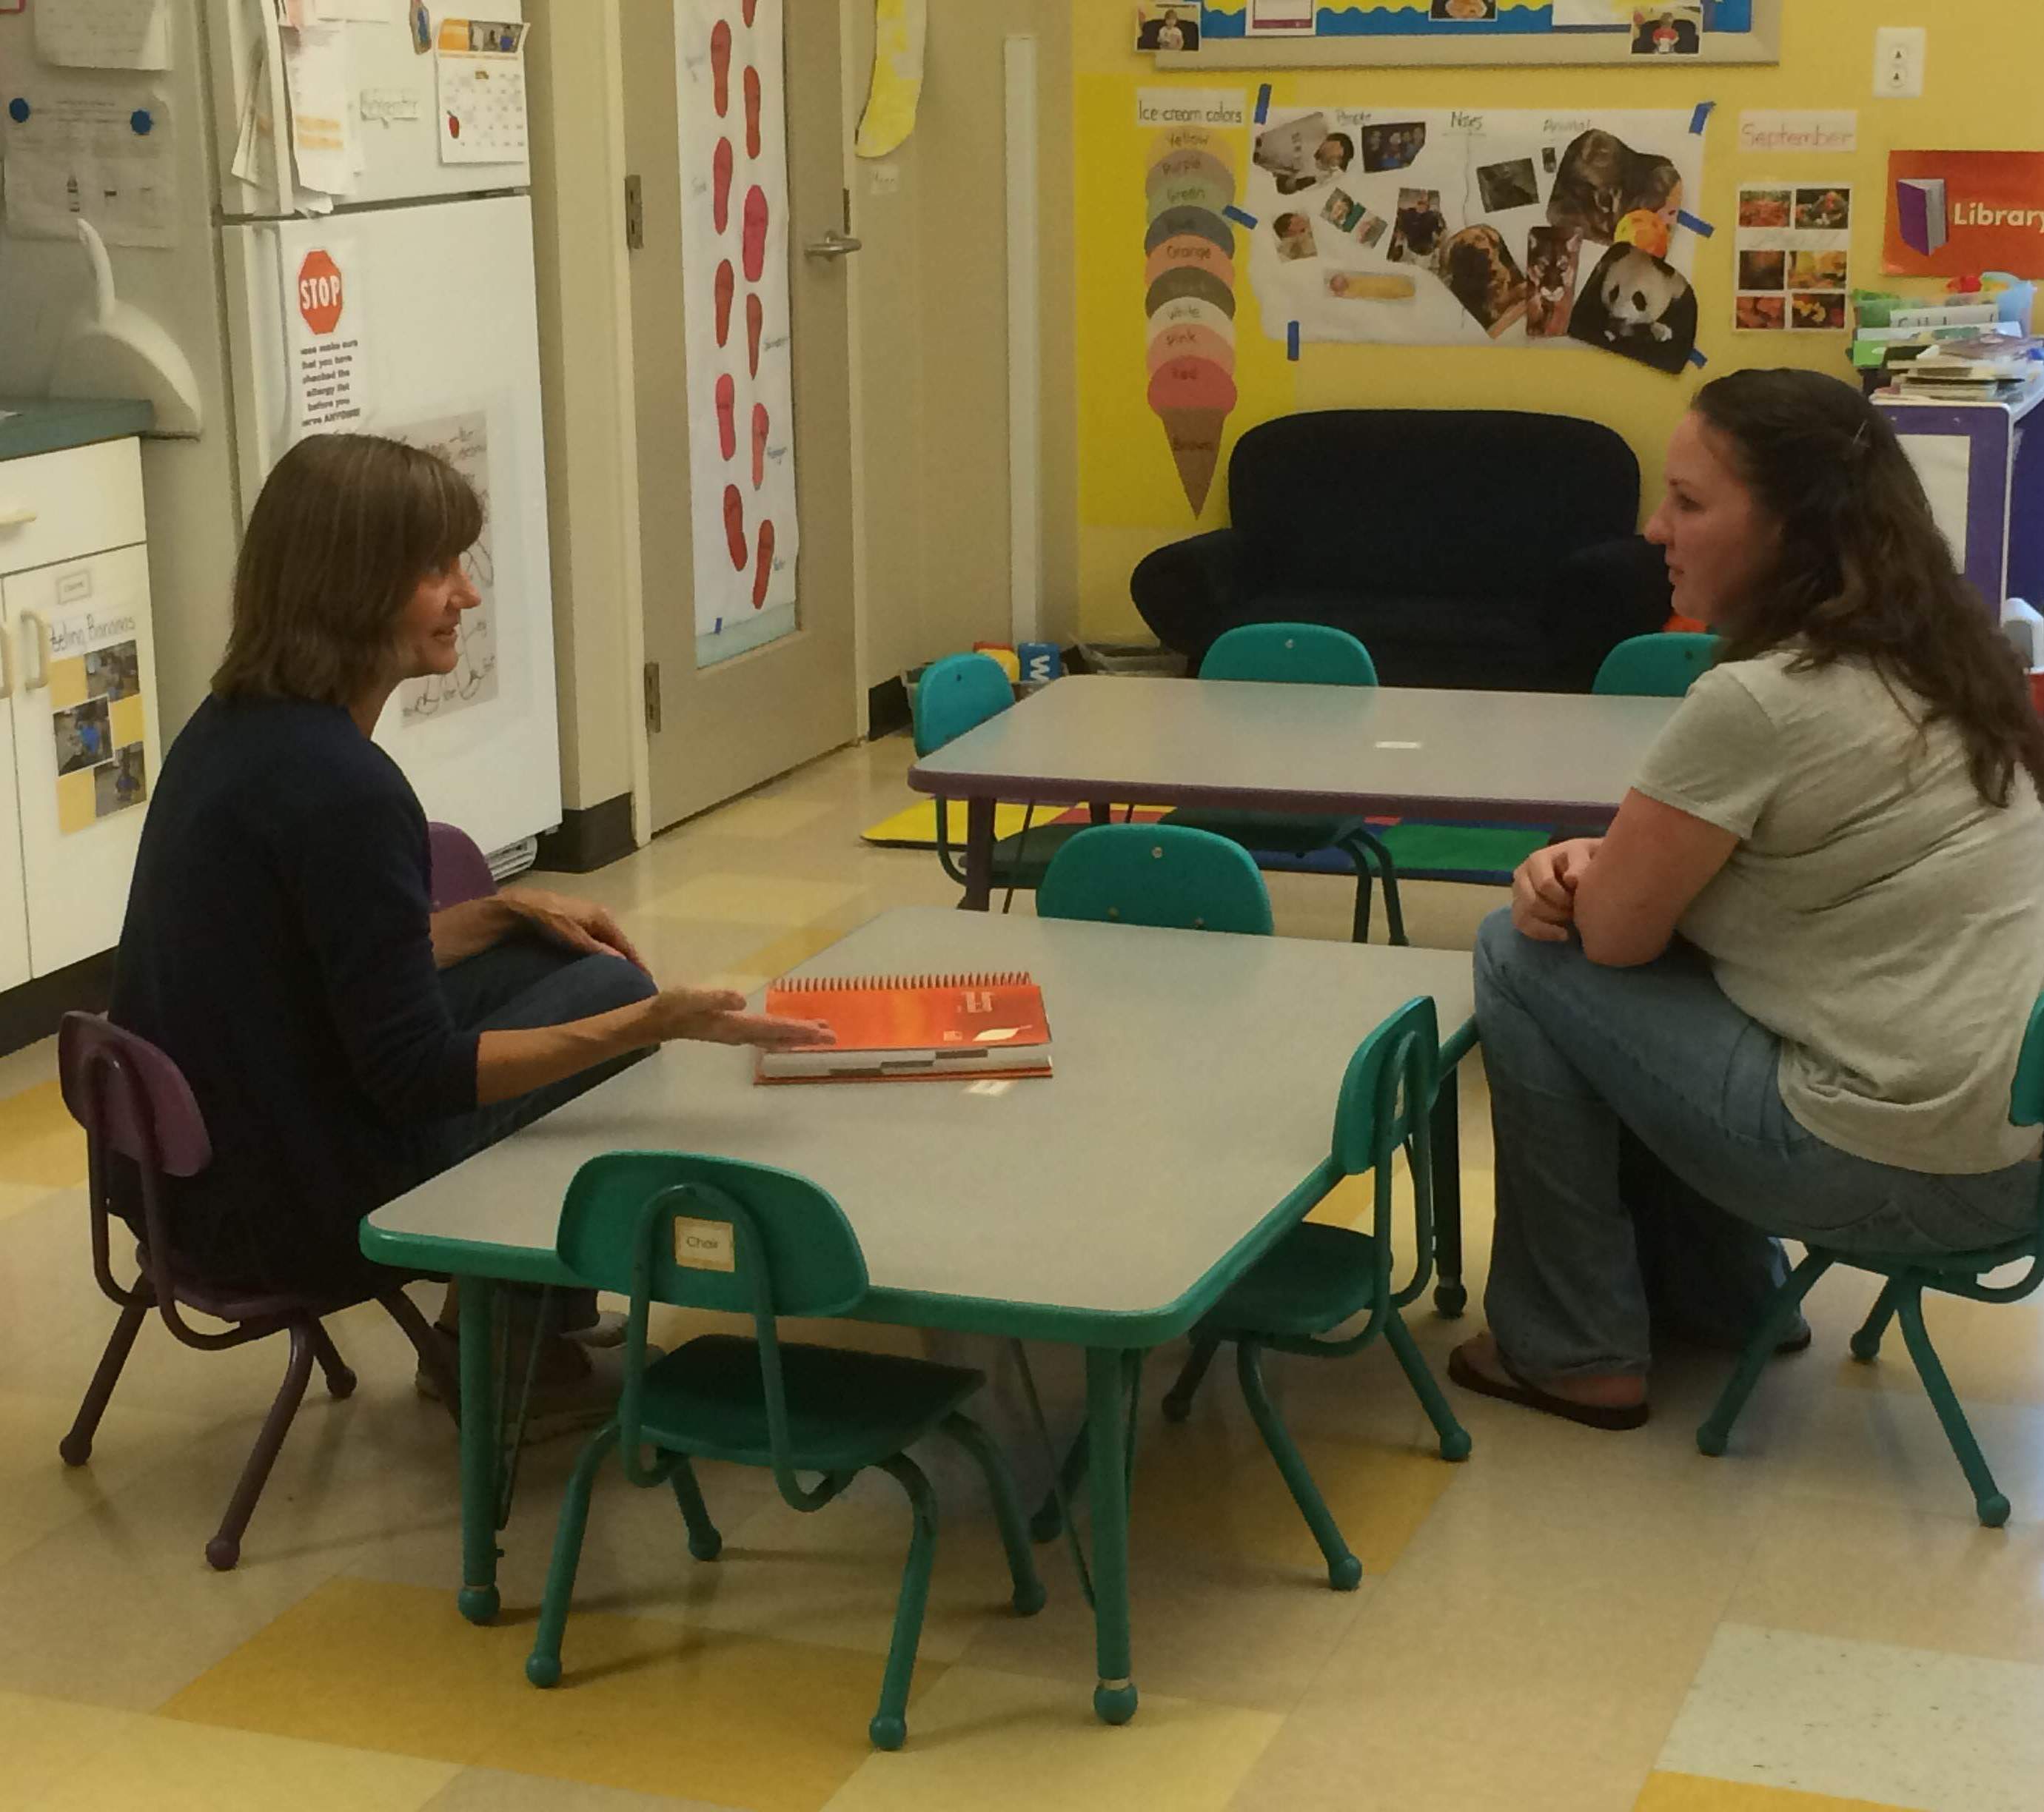 Deep in thought and conversation during back to School night.